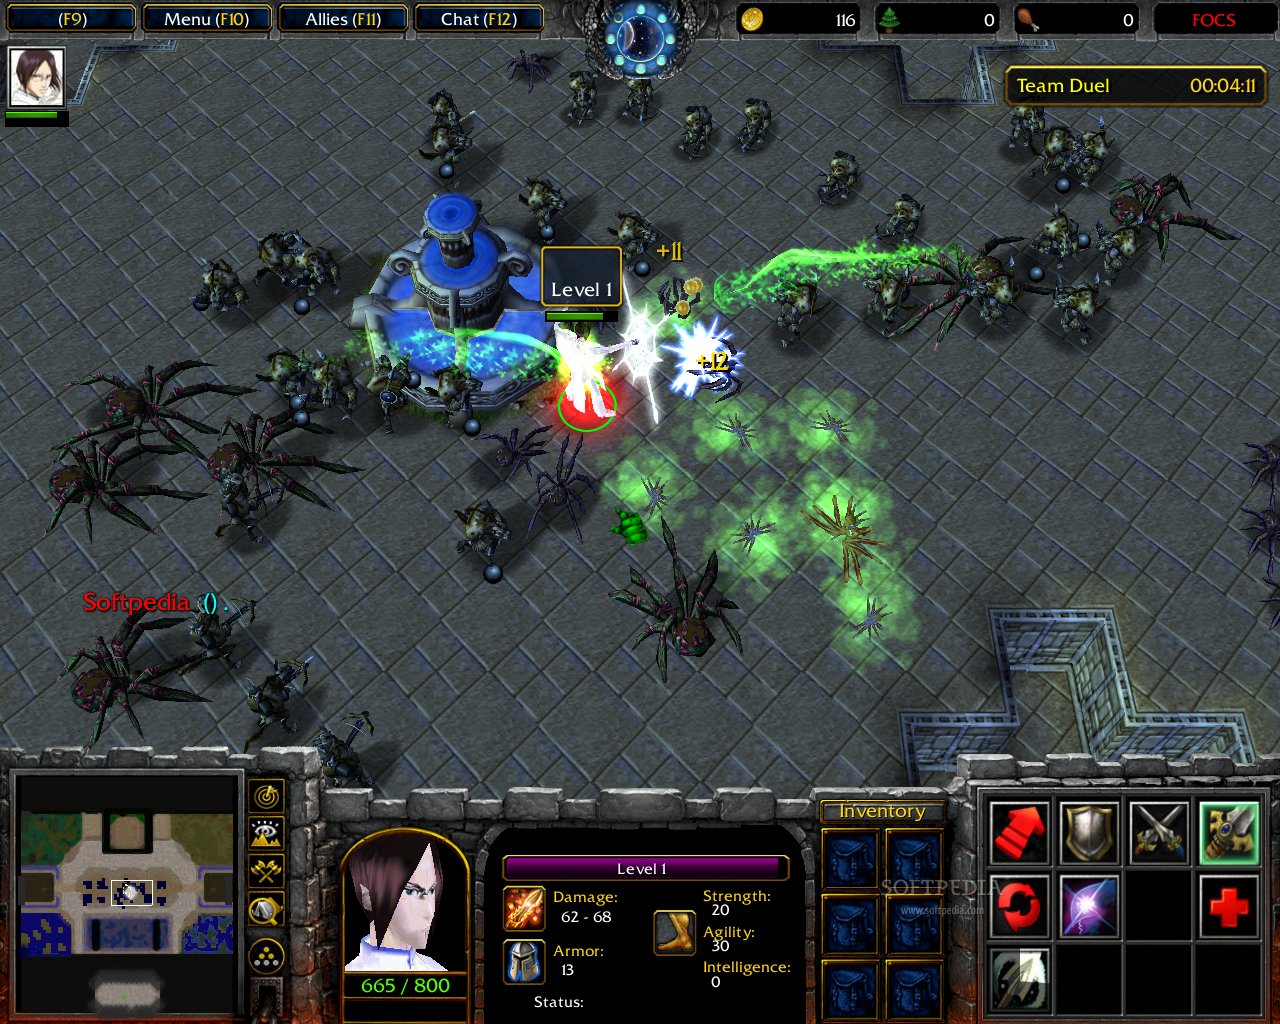 download warcraft 3 full game free for pc